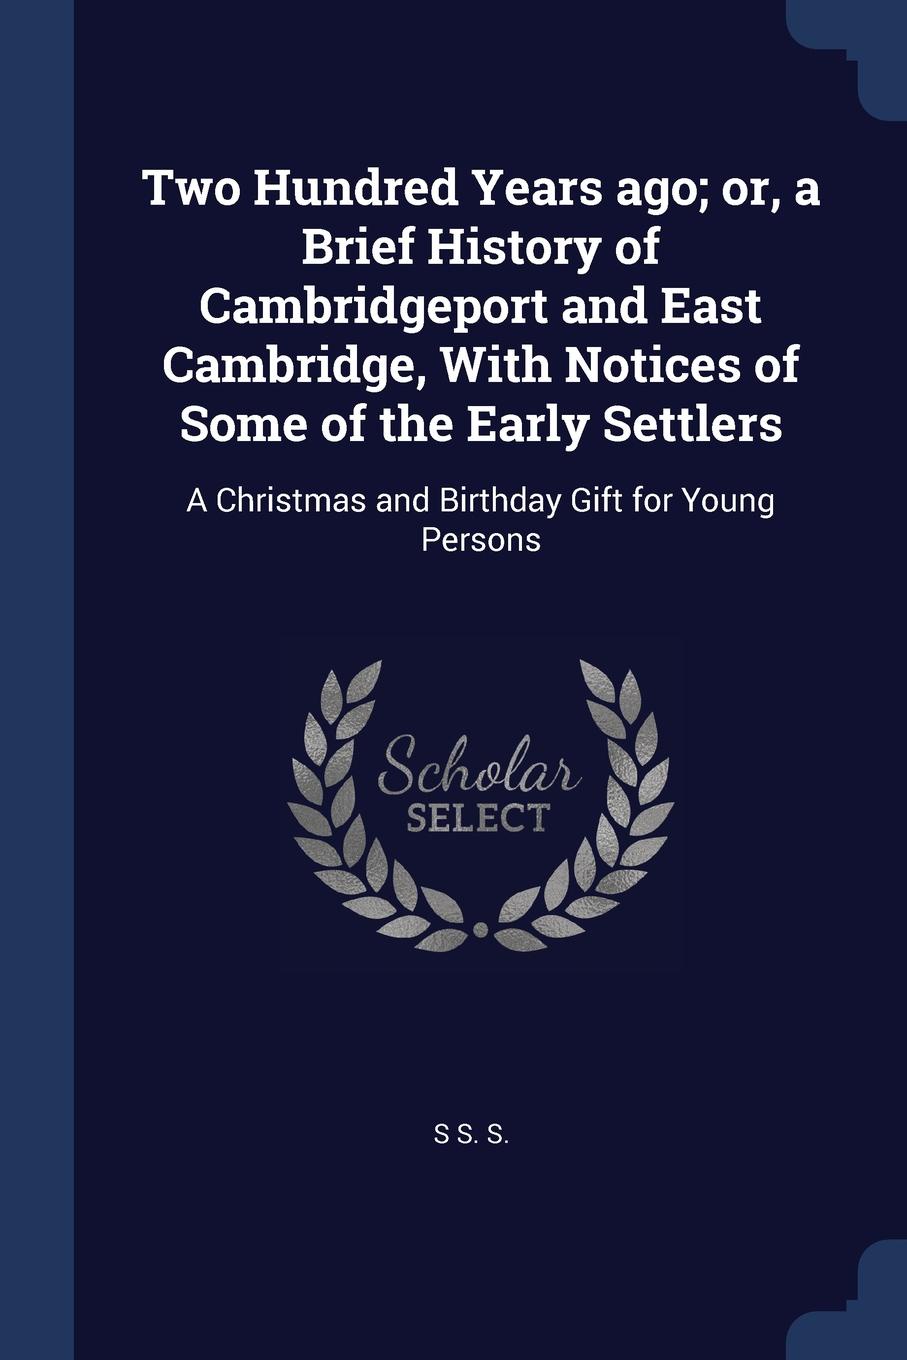 Two Hundred Years ago; or, a Brief History of Cambridgeport and East Cambridge, With Notices of Some of the Early Settlers. A Christmas and Birthday Gift for Young Persons